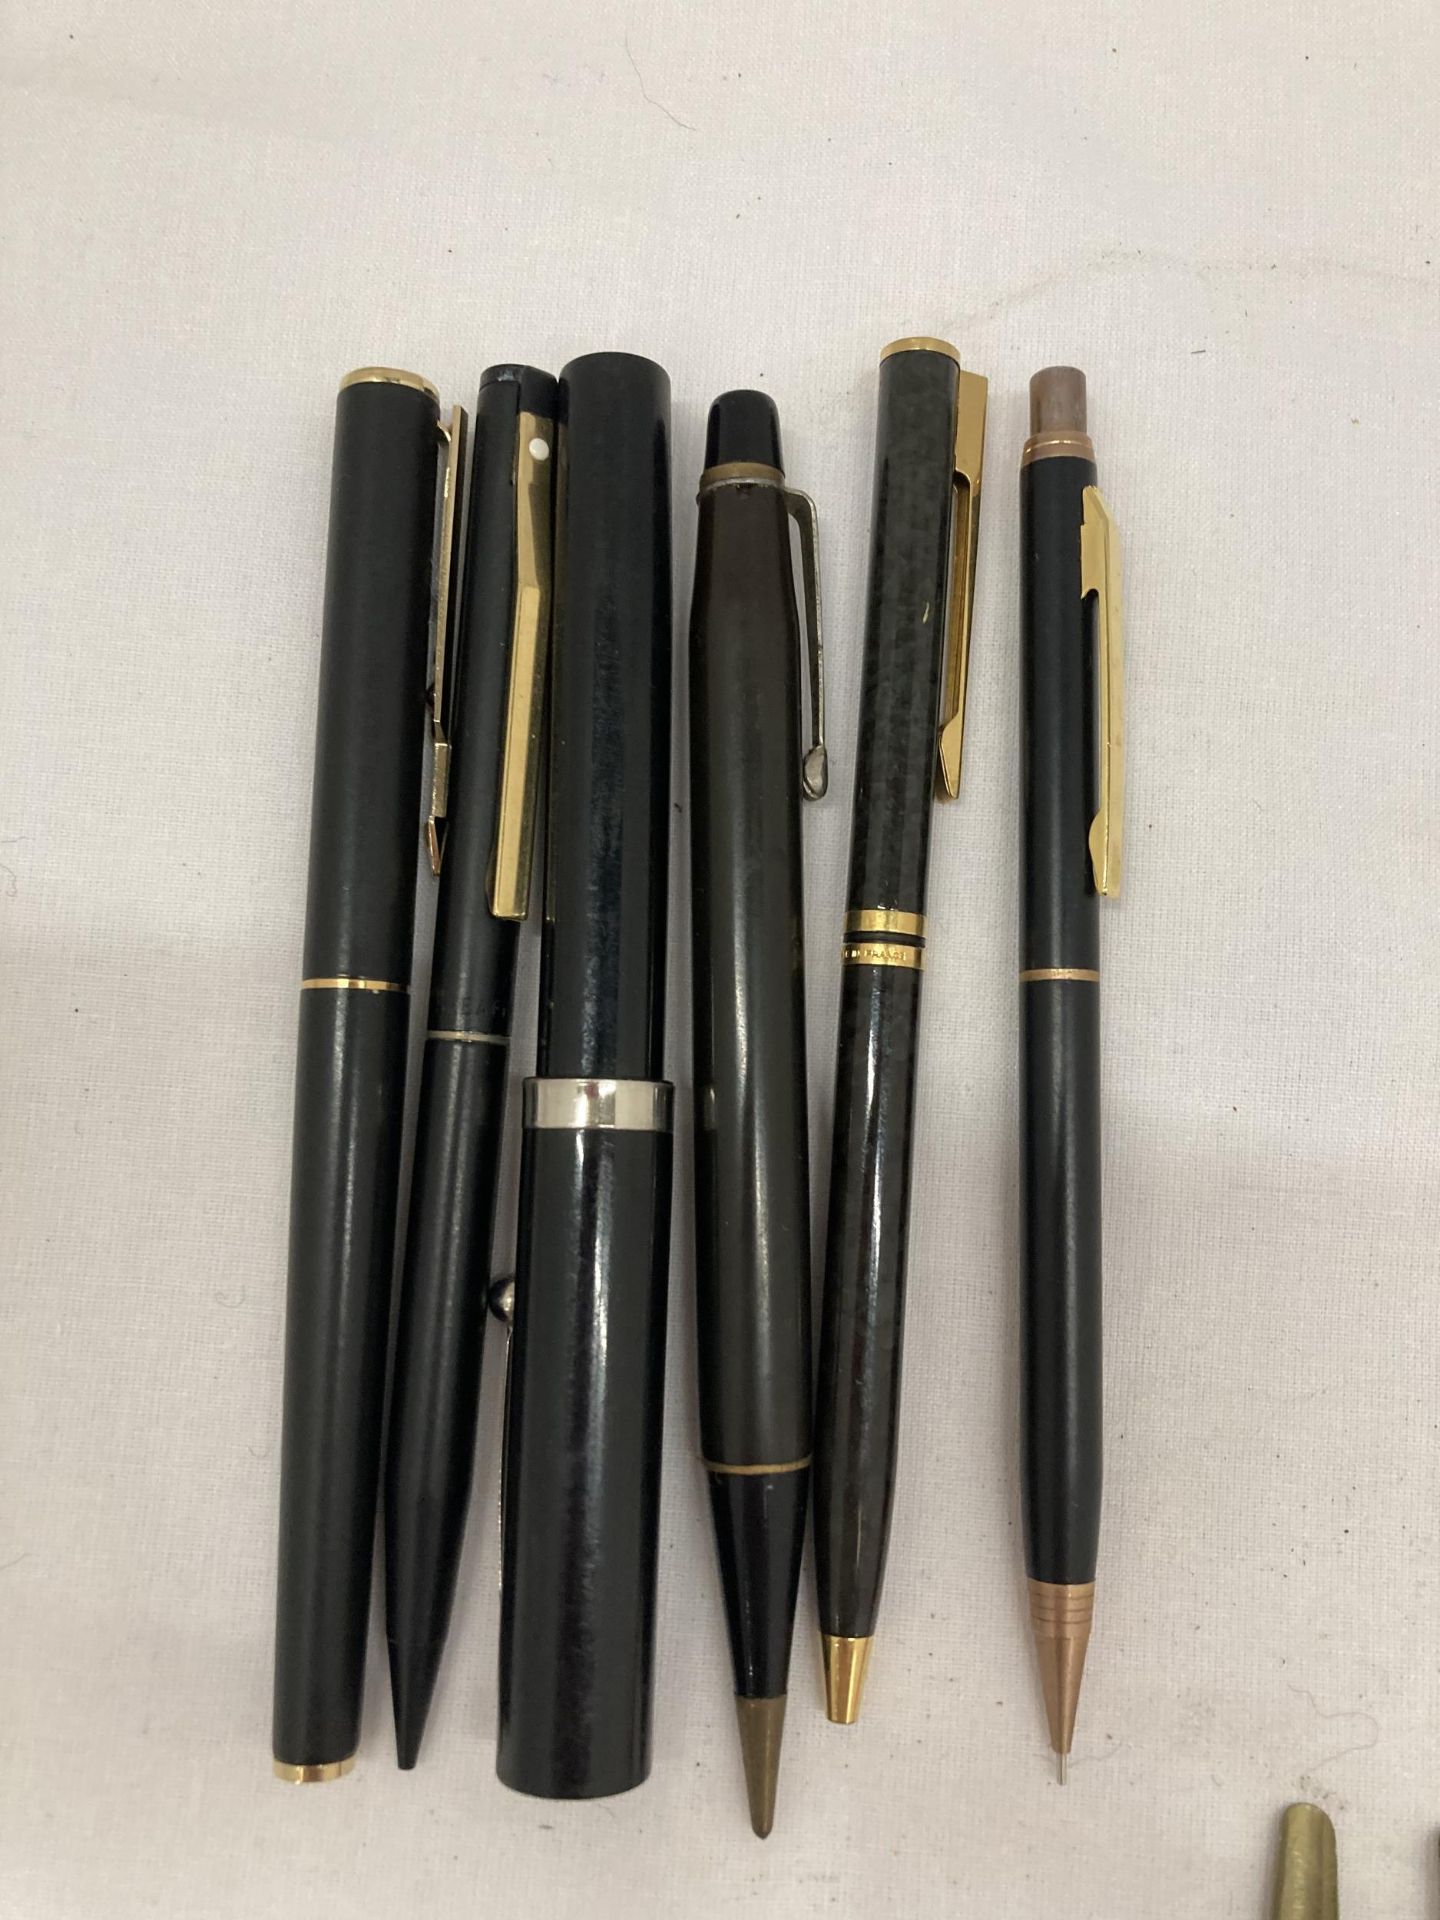 A COLLECTION OF SCHAEFFER BALLPOINT AND FOUNTAIN PENS PLUS A QUANTITY OF PEN NIBS - Image 2 of 3